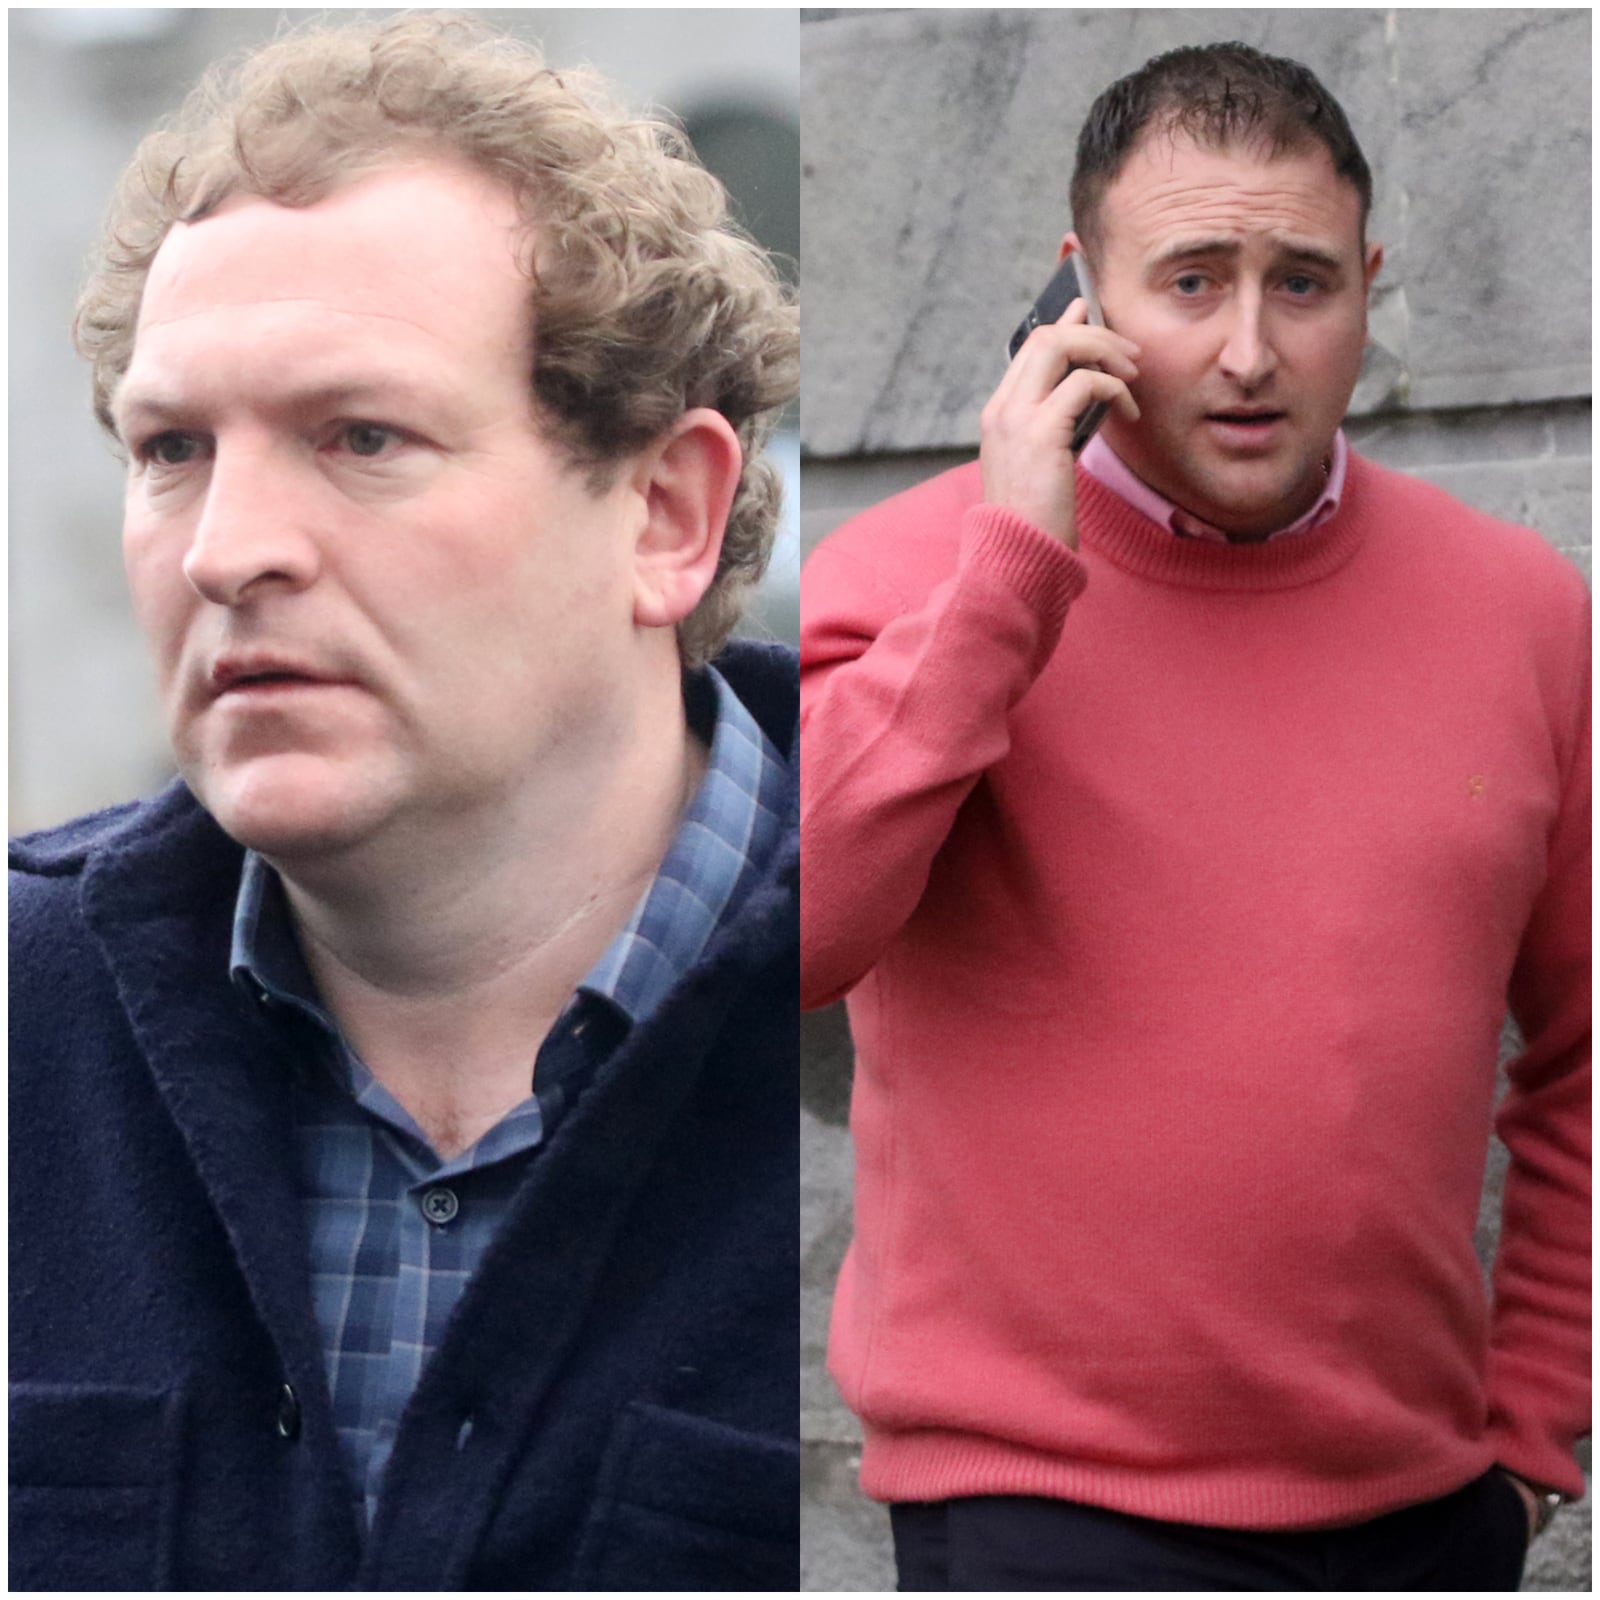 Michael Morgan (43) Cluain Muilleann, Nenagh and John Walsh (36) of Coille Bheithe, Nenagh, were both charged with possessing cocaine for sale or supply. Photographs: Brendan Gleeson